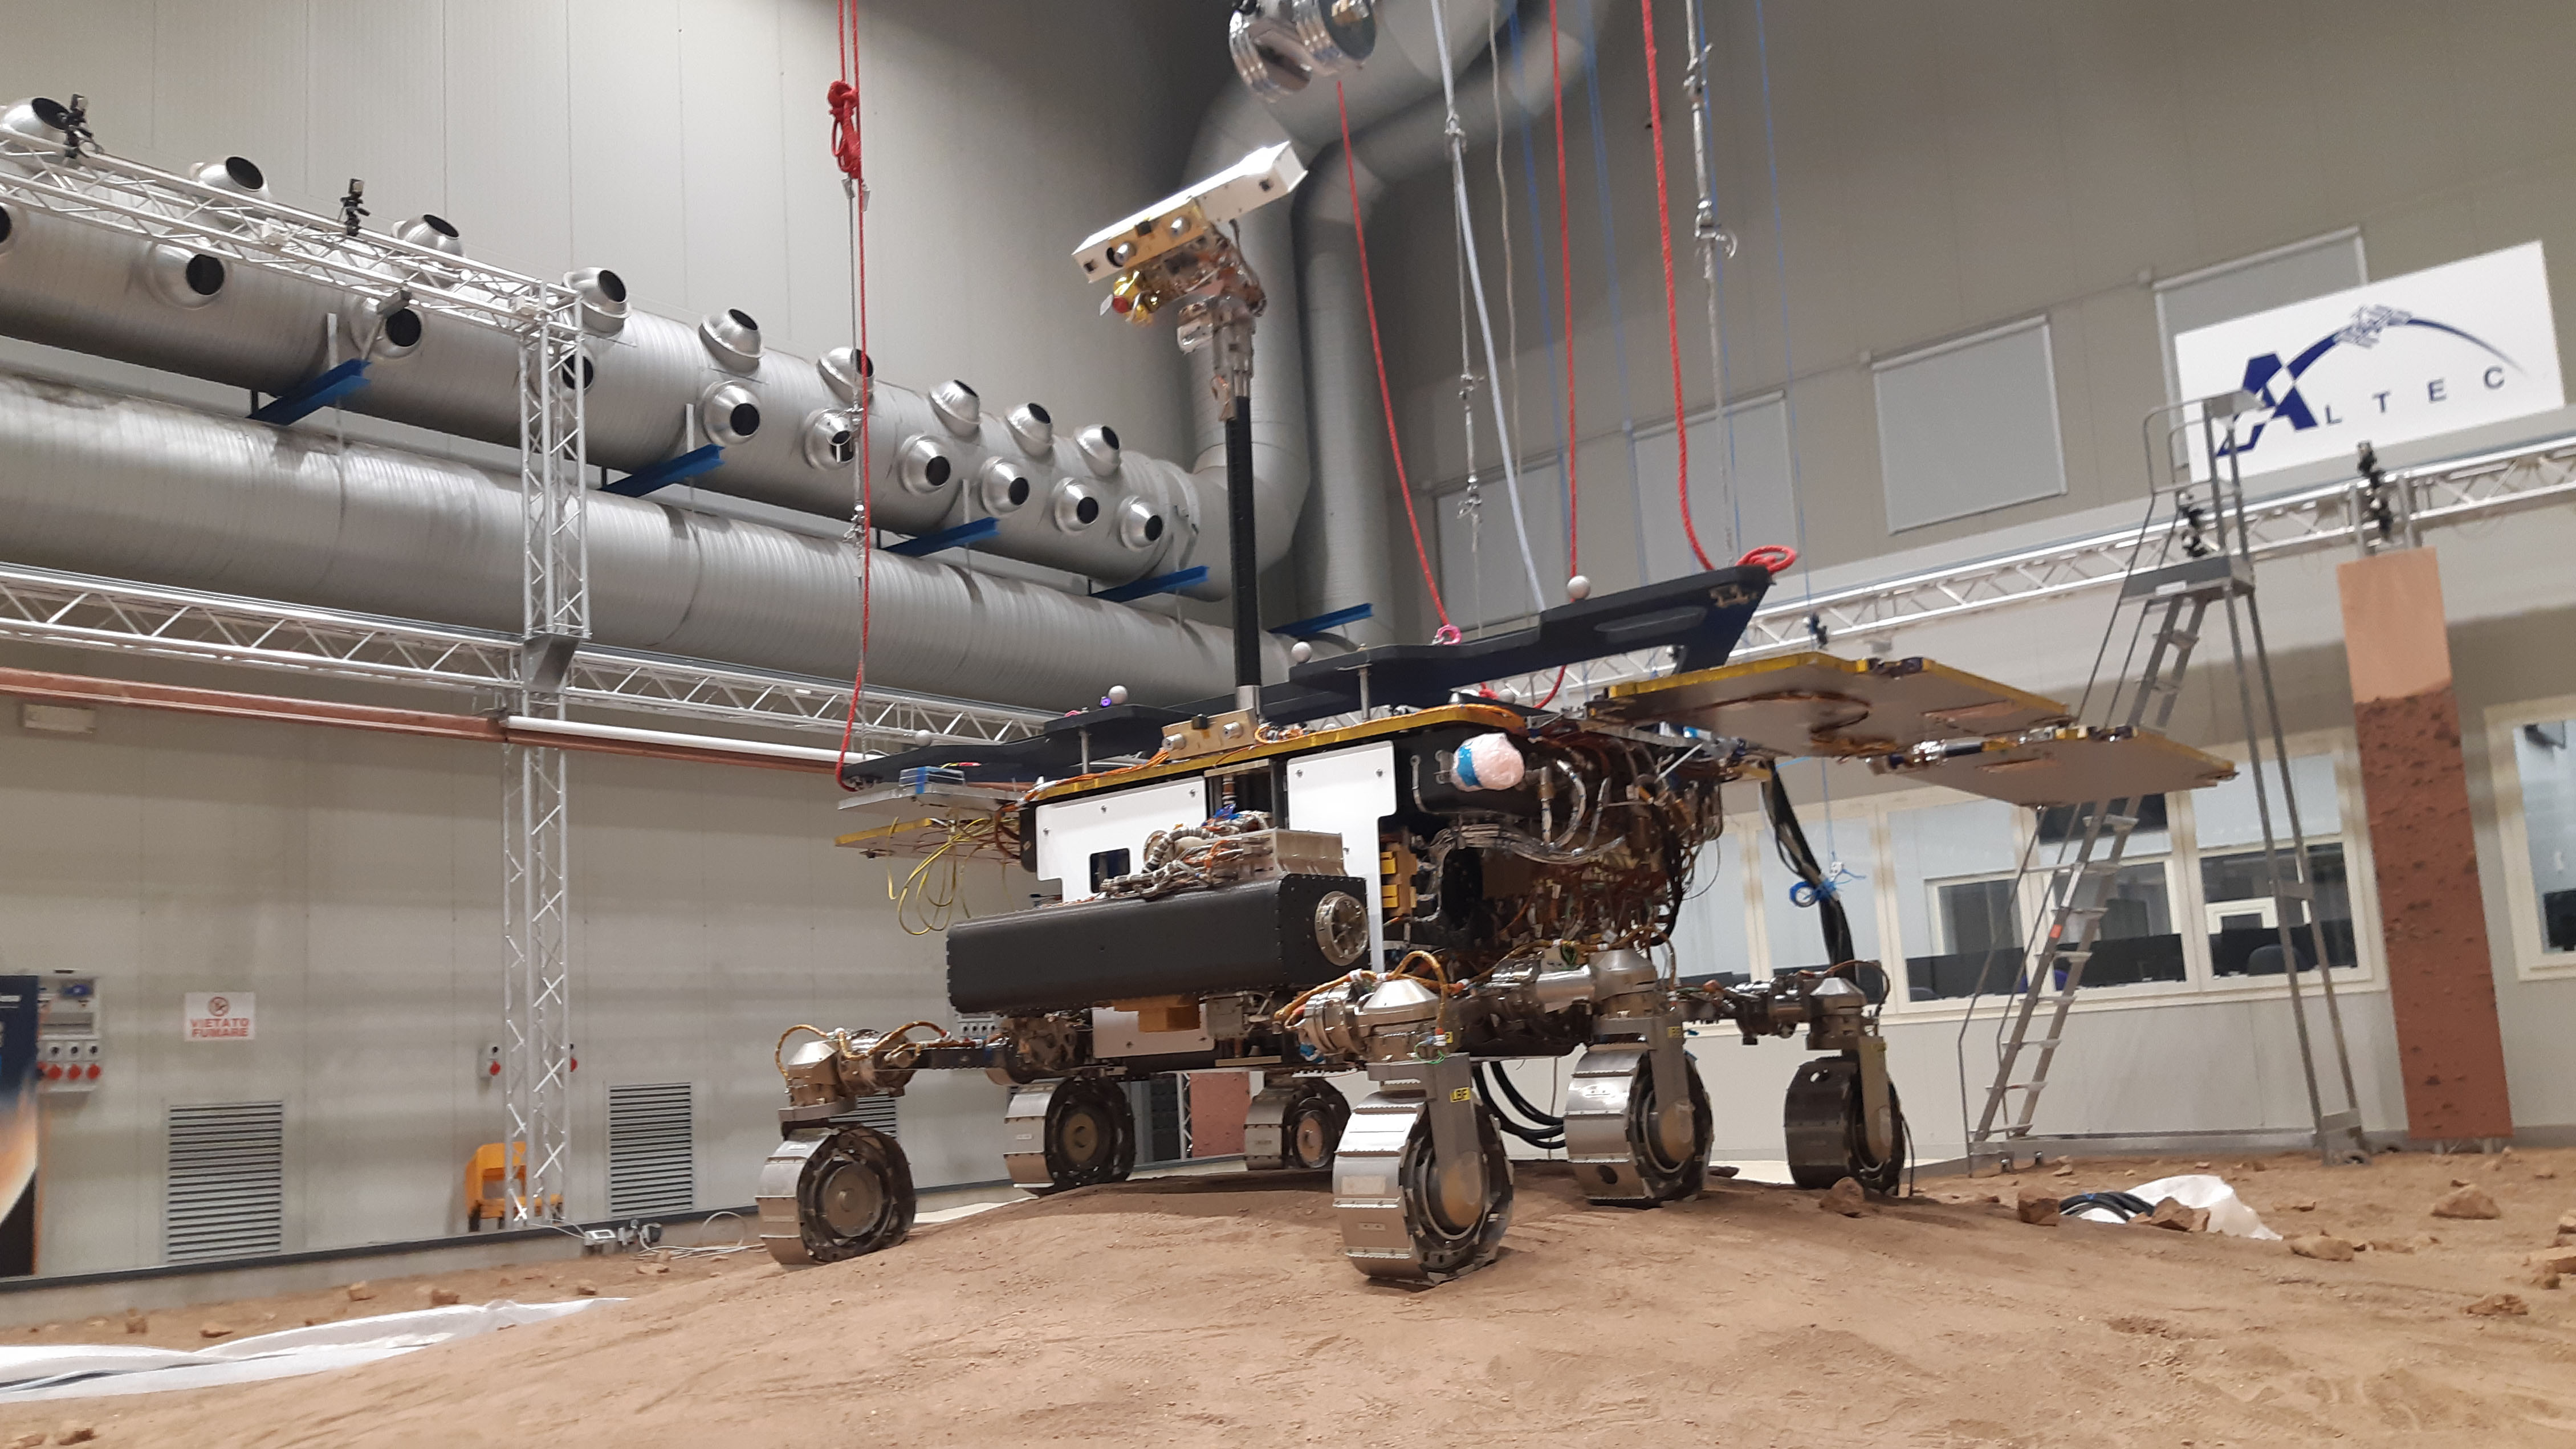 The ground test model of the European ExoMars Rosalind Franklin rover at a Mars yard in Turin, Italy, where it will help operators practice ahead of Rosalind Franklin's arrival to the red planet in 2023.